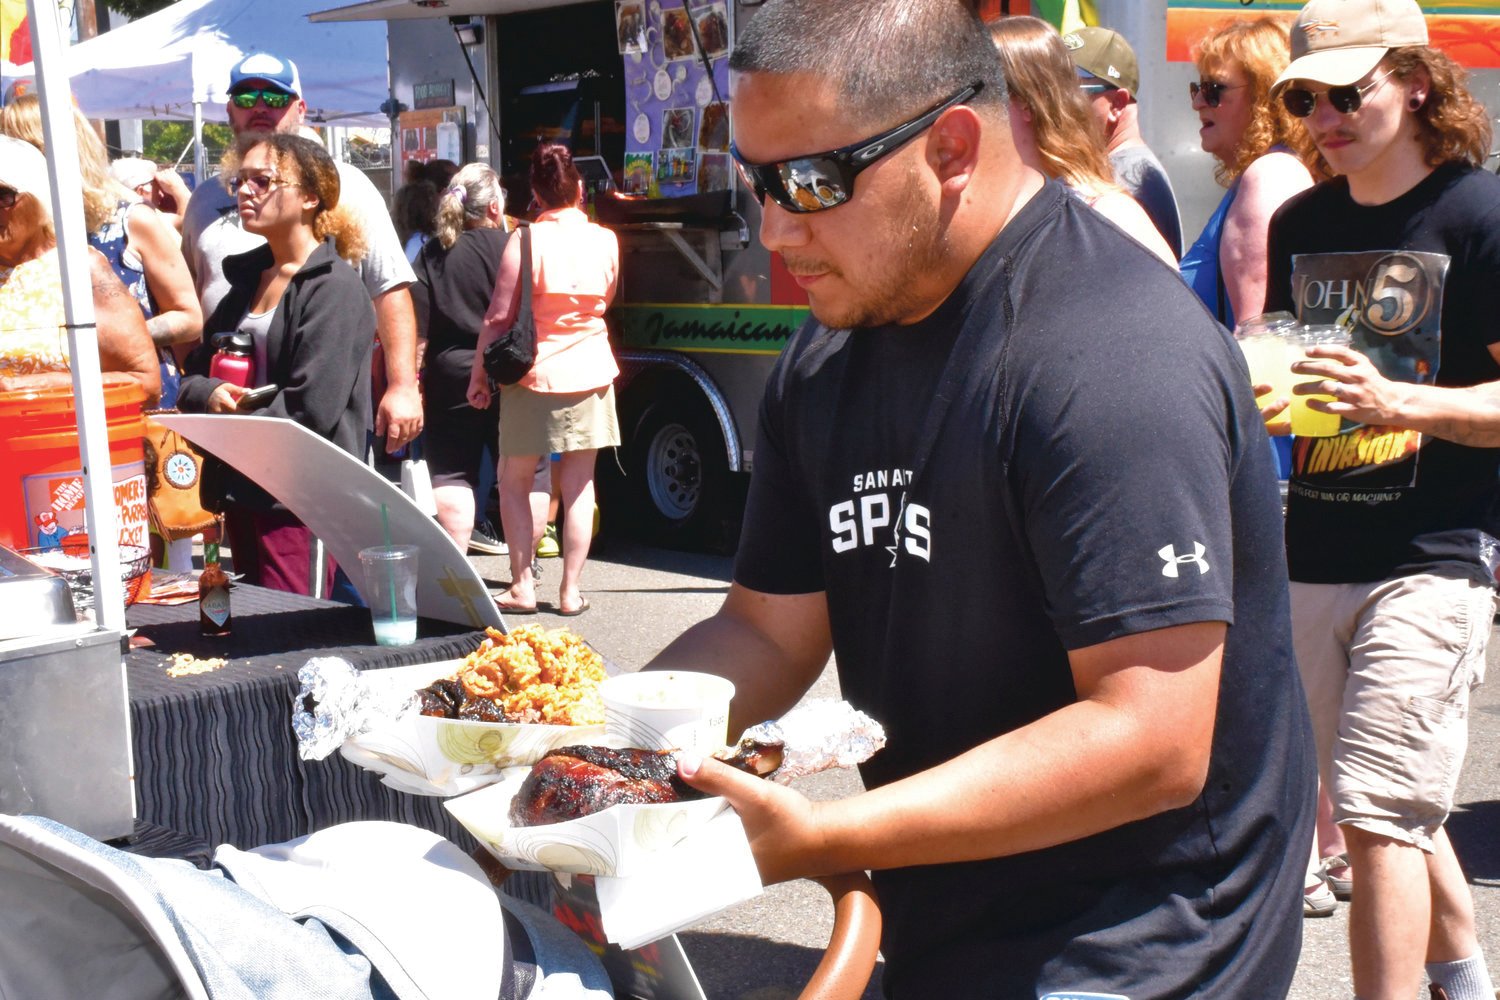 More than 8,000 people came out to the Nisqually Valley BBQ Rally on Saturday, July 24, 2021. Folks ate their hearts out, listened to live music and competed in pie-eating and amateur barbecue contests as well as played carnival games.